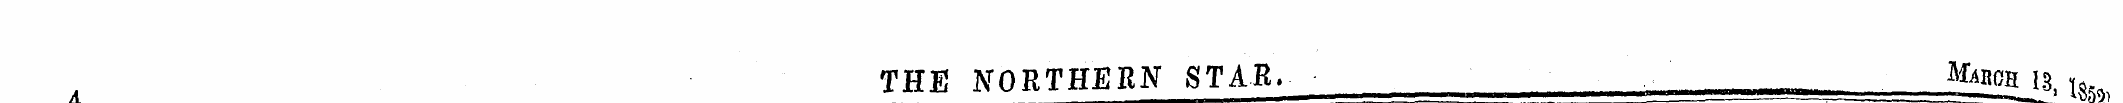 THE NORTHERN STAR. Mmoh 13. i ?: 4 — - -...